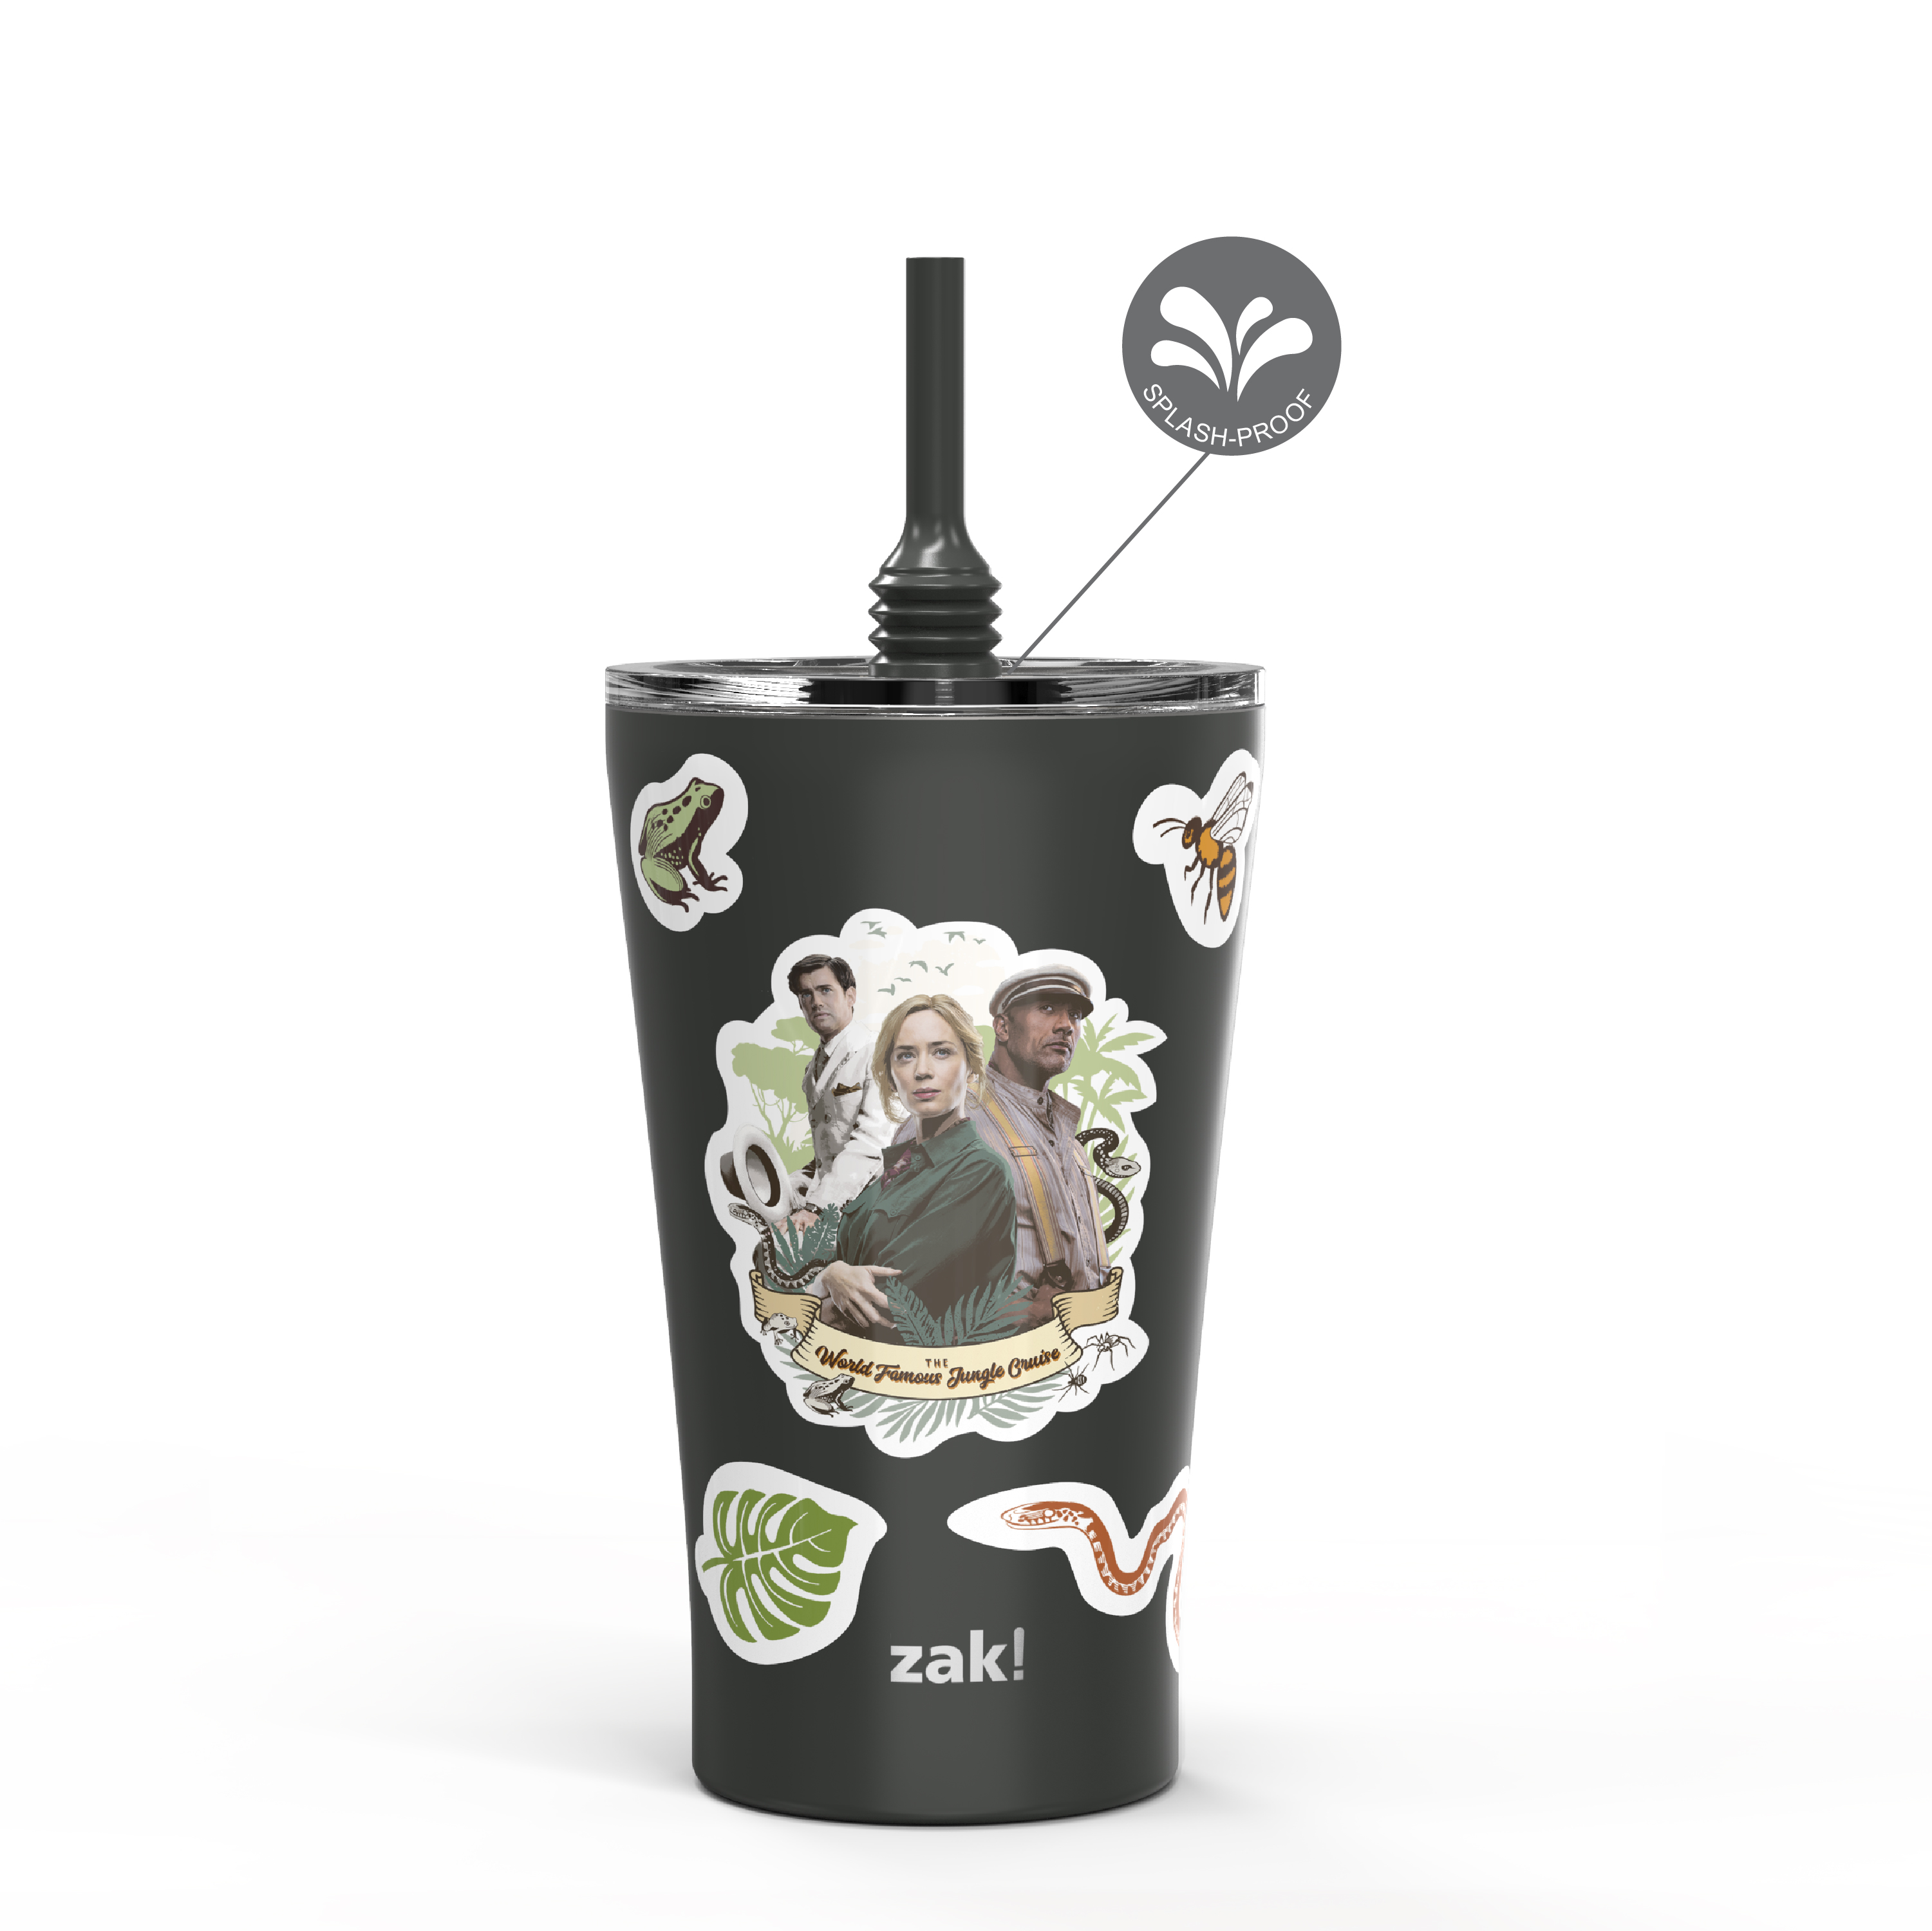 Jungle Cruise 20 ounce Insulated Tumbler with Stickers, Frank and Lily slideshow image 1